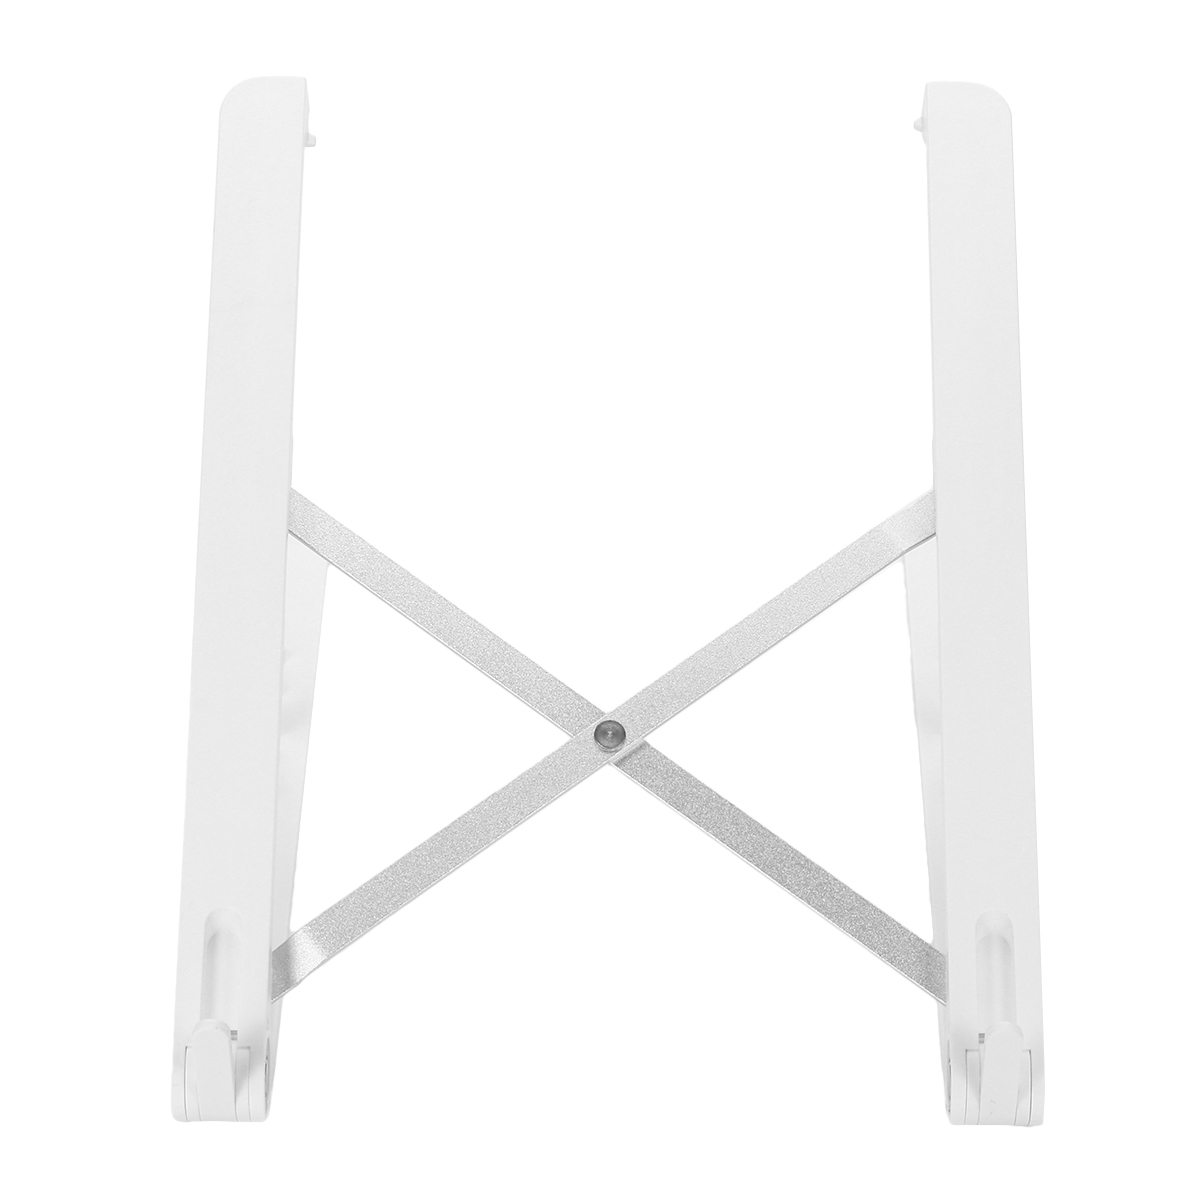 Foldable 5 Height Adjustable Laptop Stand Tablet Stand Heat Dissipation for iPad Macbook below 17 inch